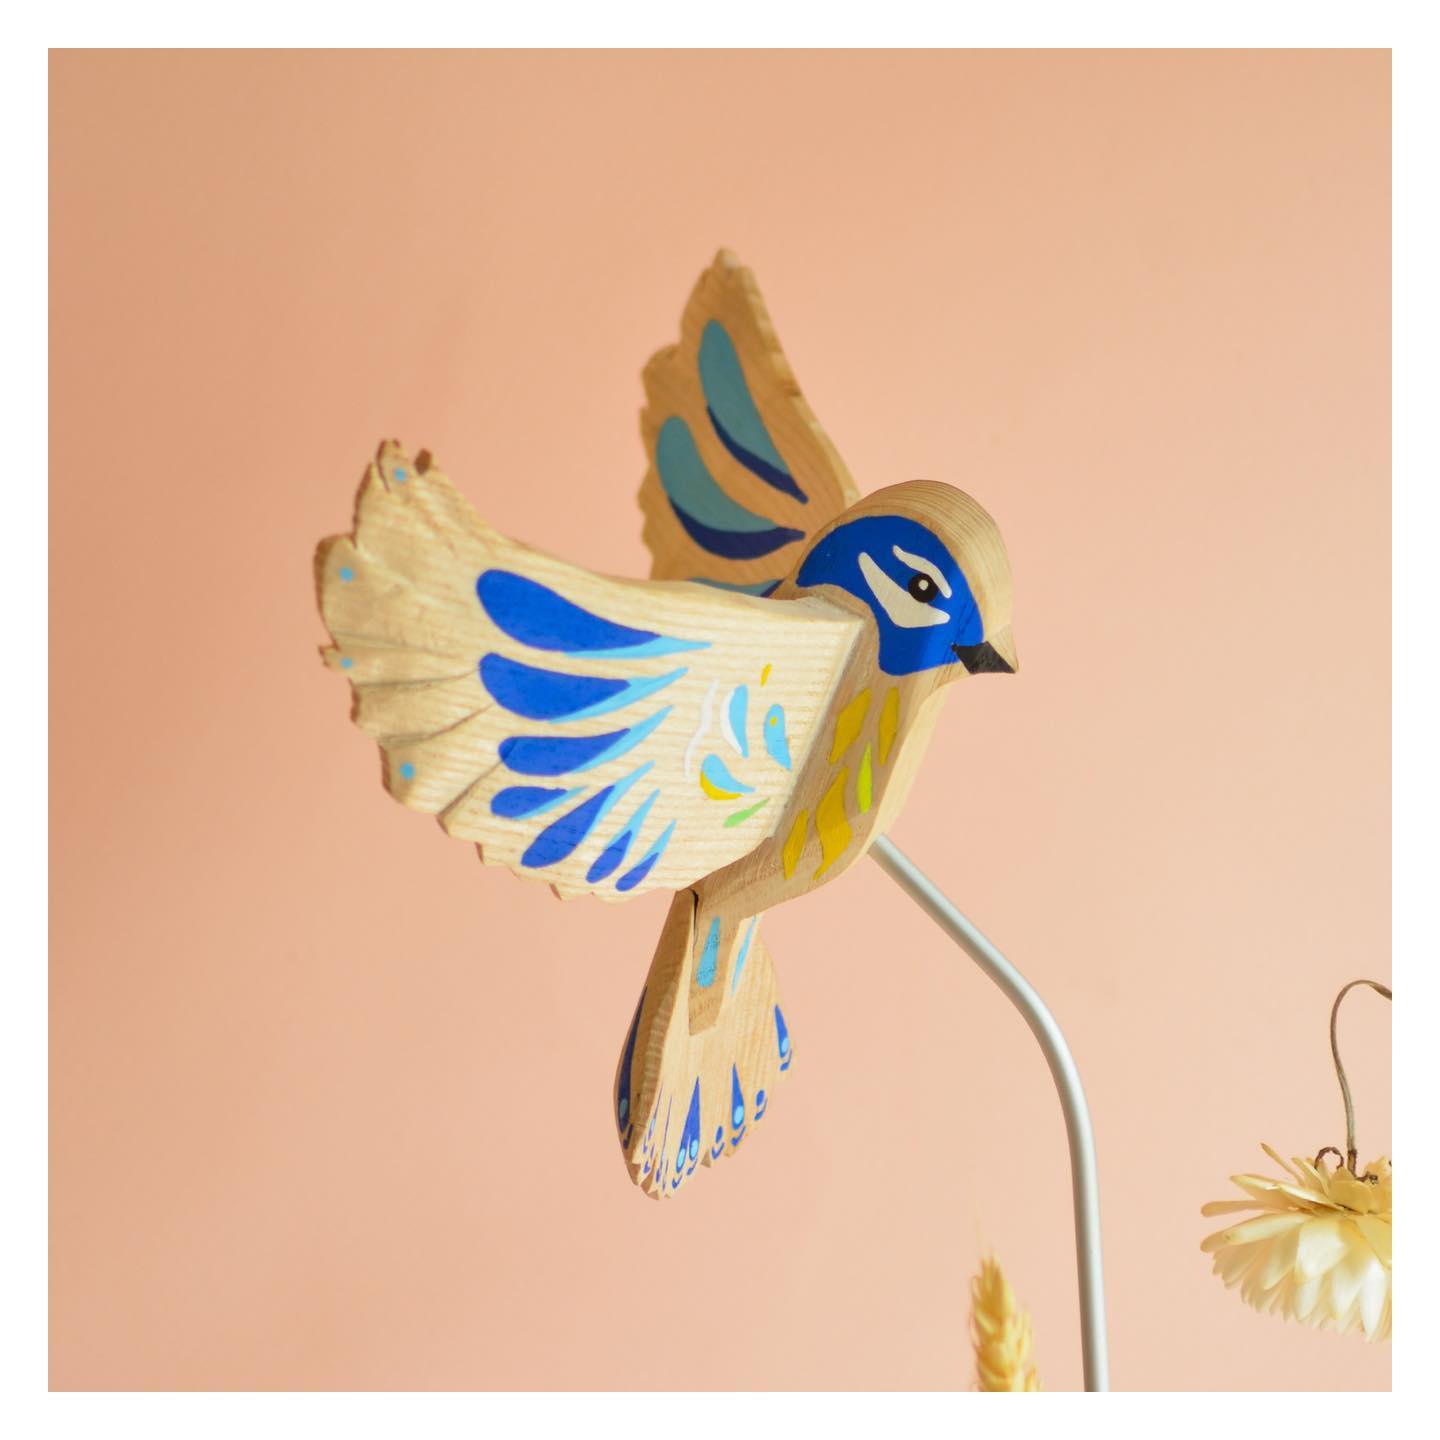 Handcrafted bird sculpture with colorful details by La Petite Hirondelle